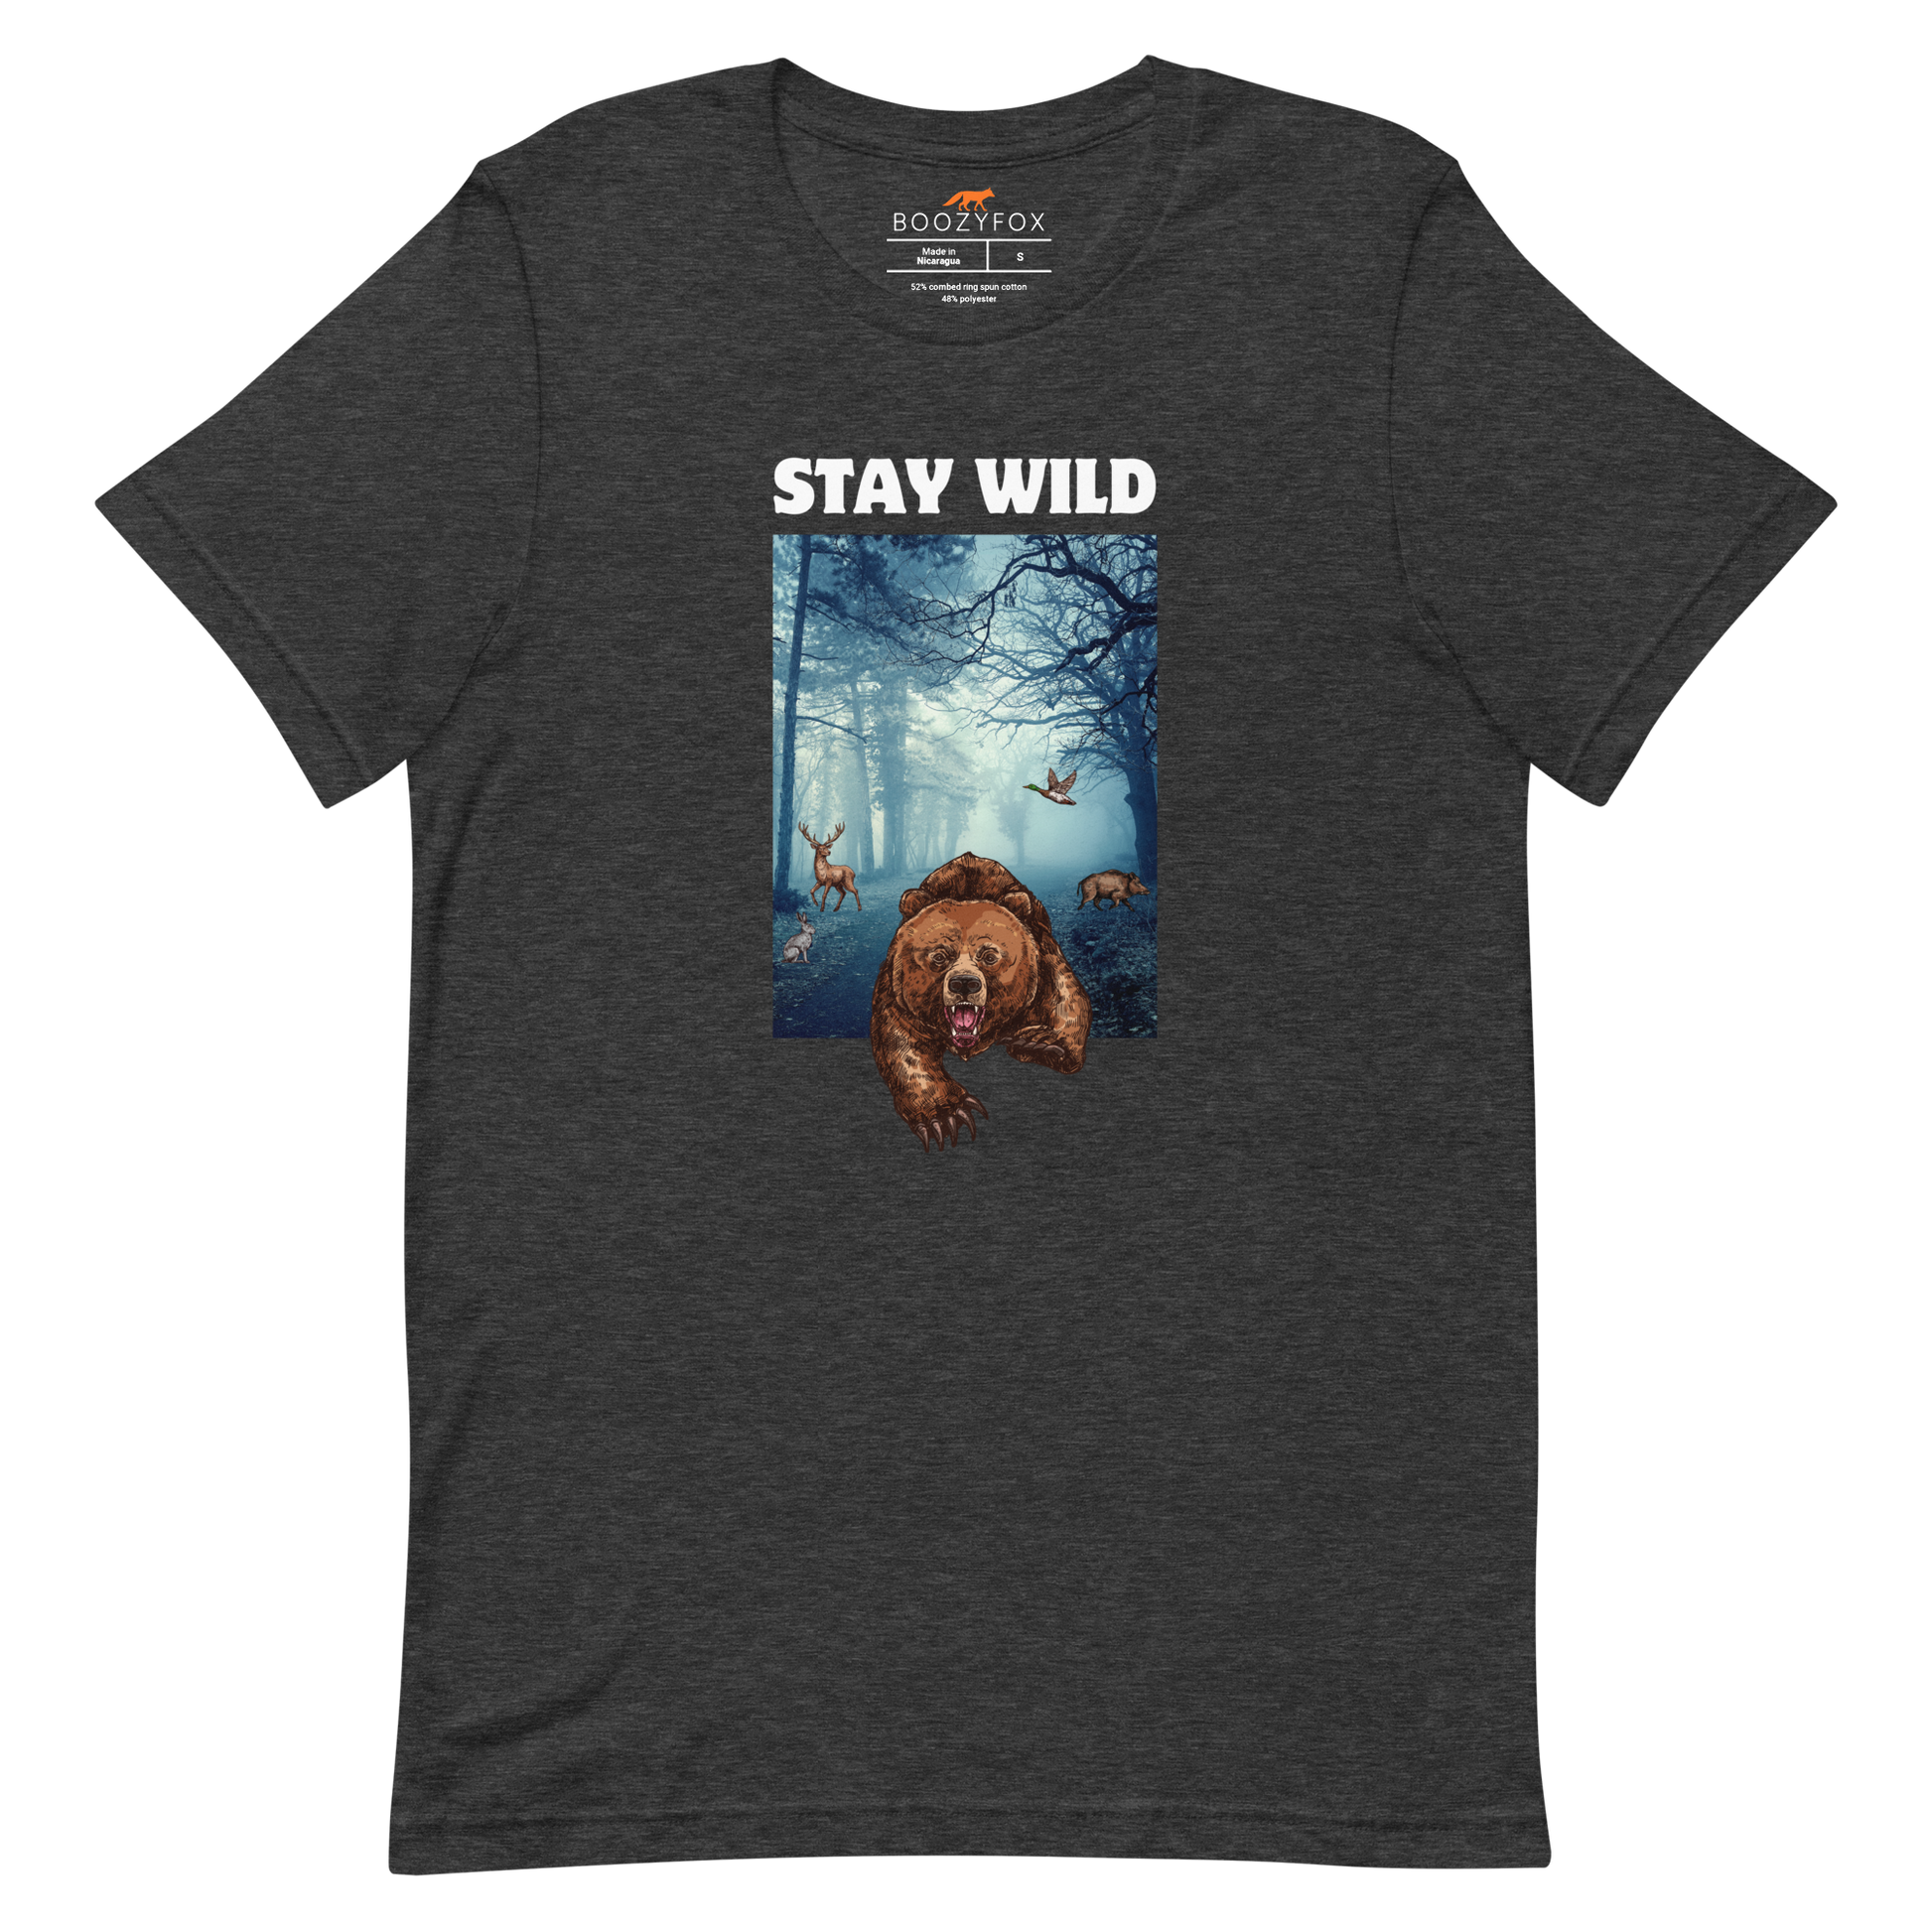 Dark Grey Heather Premium Bear Tee featuring a Stay Wild graphic on the chest - Cool Graphic Bear Tees - Boozy Fox